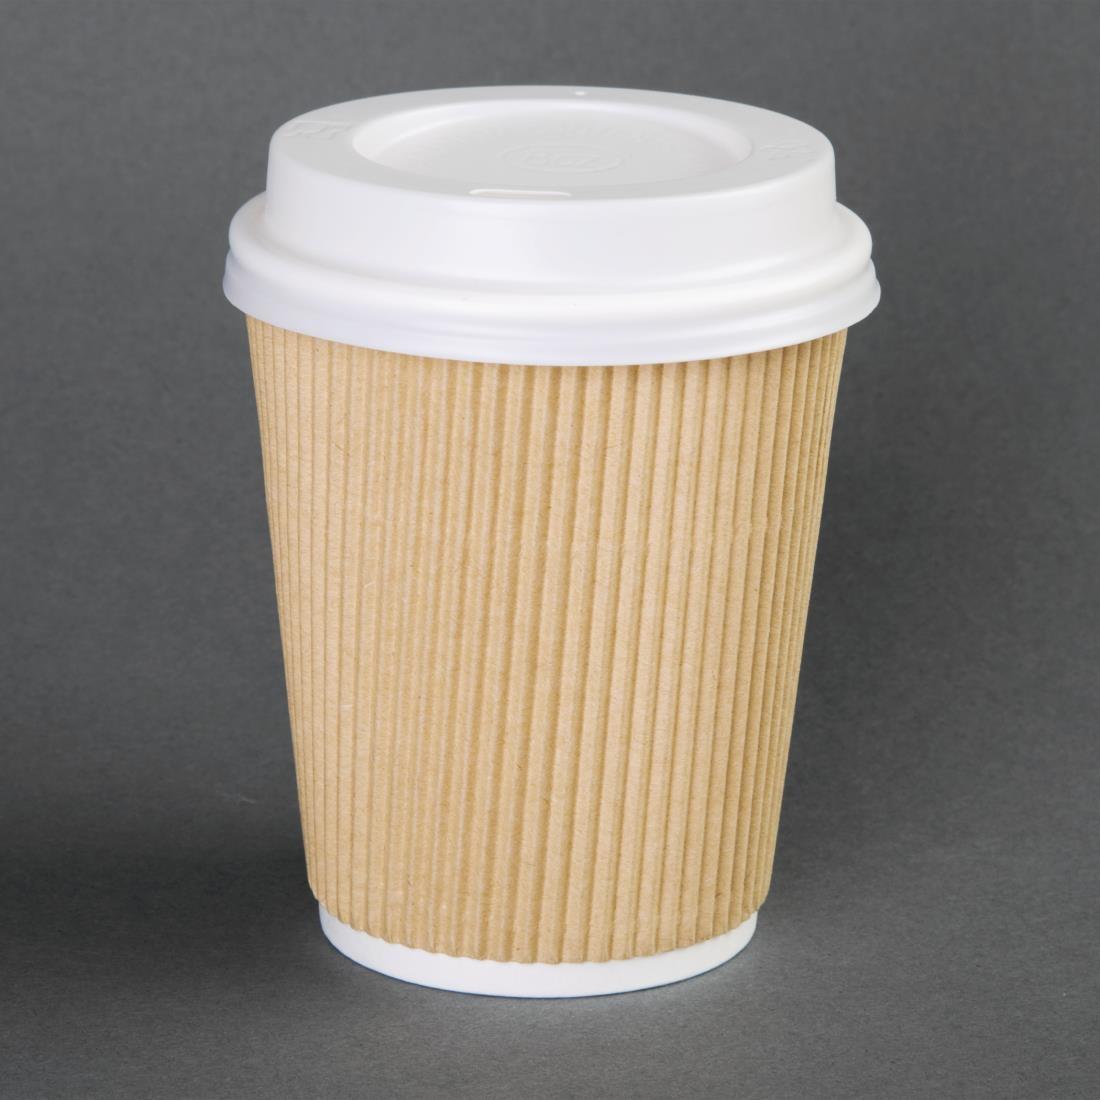 Fiesta Recyclable Coffee Cup Lids White 340ml / 12oz and 455ml / 16oz (Pack of 1000) - CE257  - 4